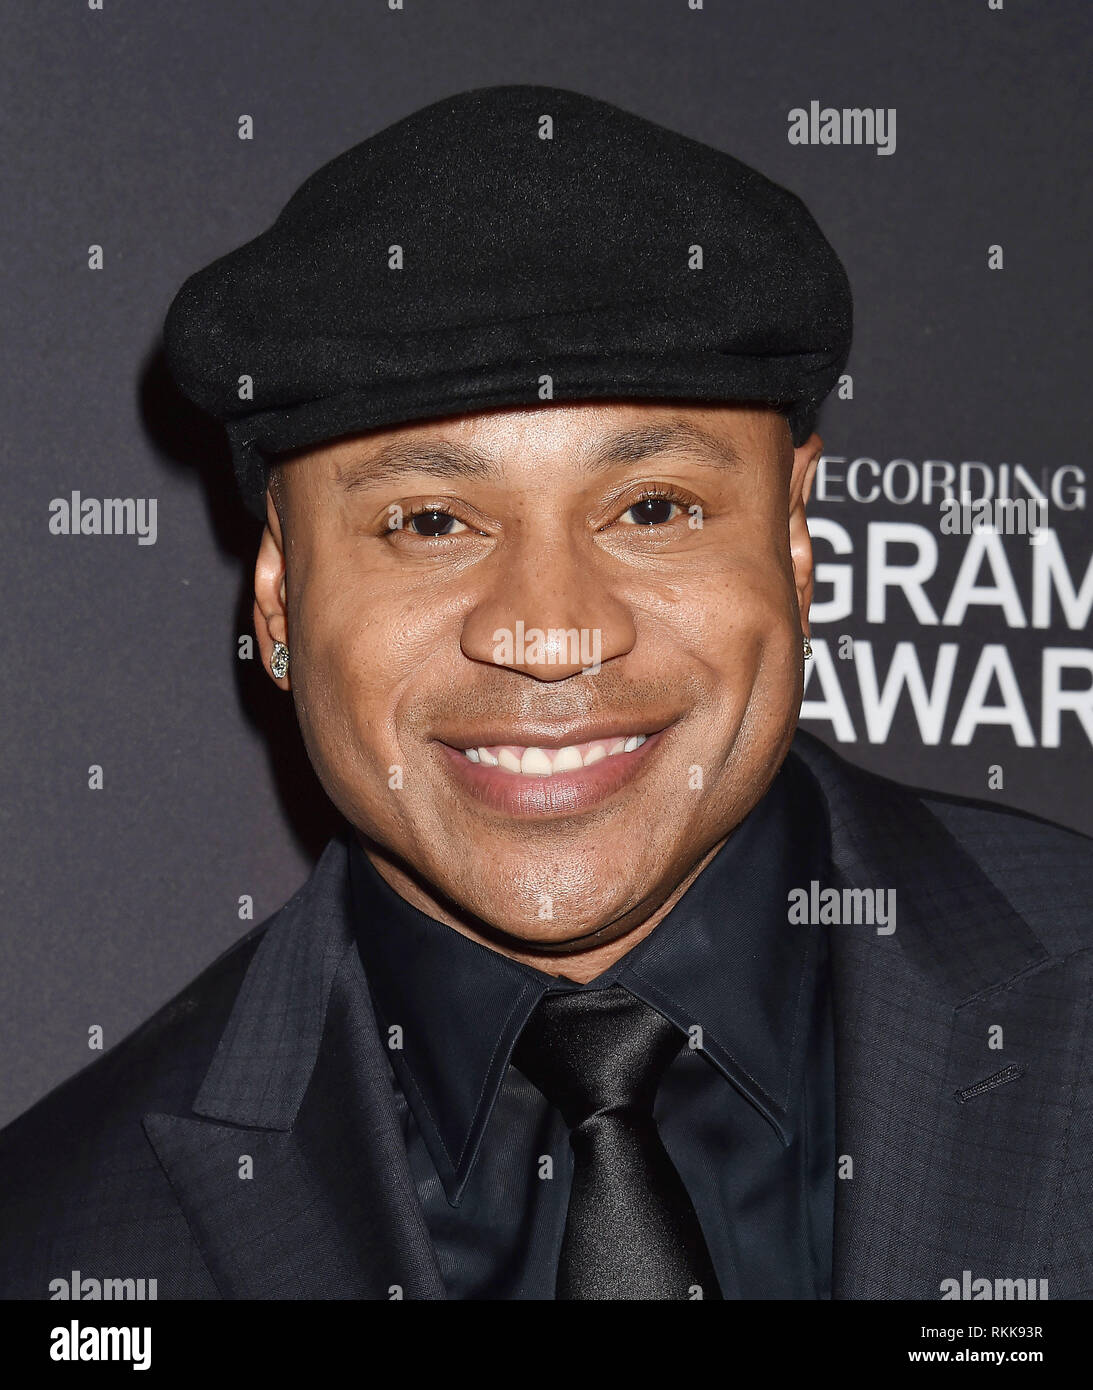 BEVERLY HILLS, CA - FEBRUARY 09: LL Cool J attends The Recording Academy And Clive Davis' 2019 Pre-GRAMMY Gala at The Beverly Hilton Hotel on February Stock Photo